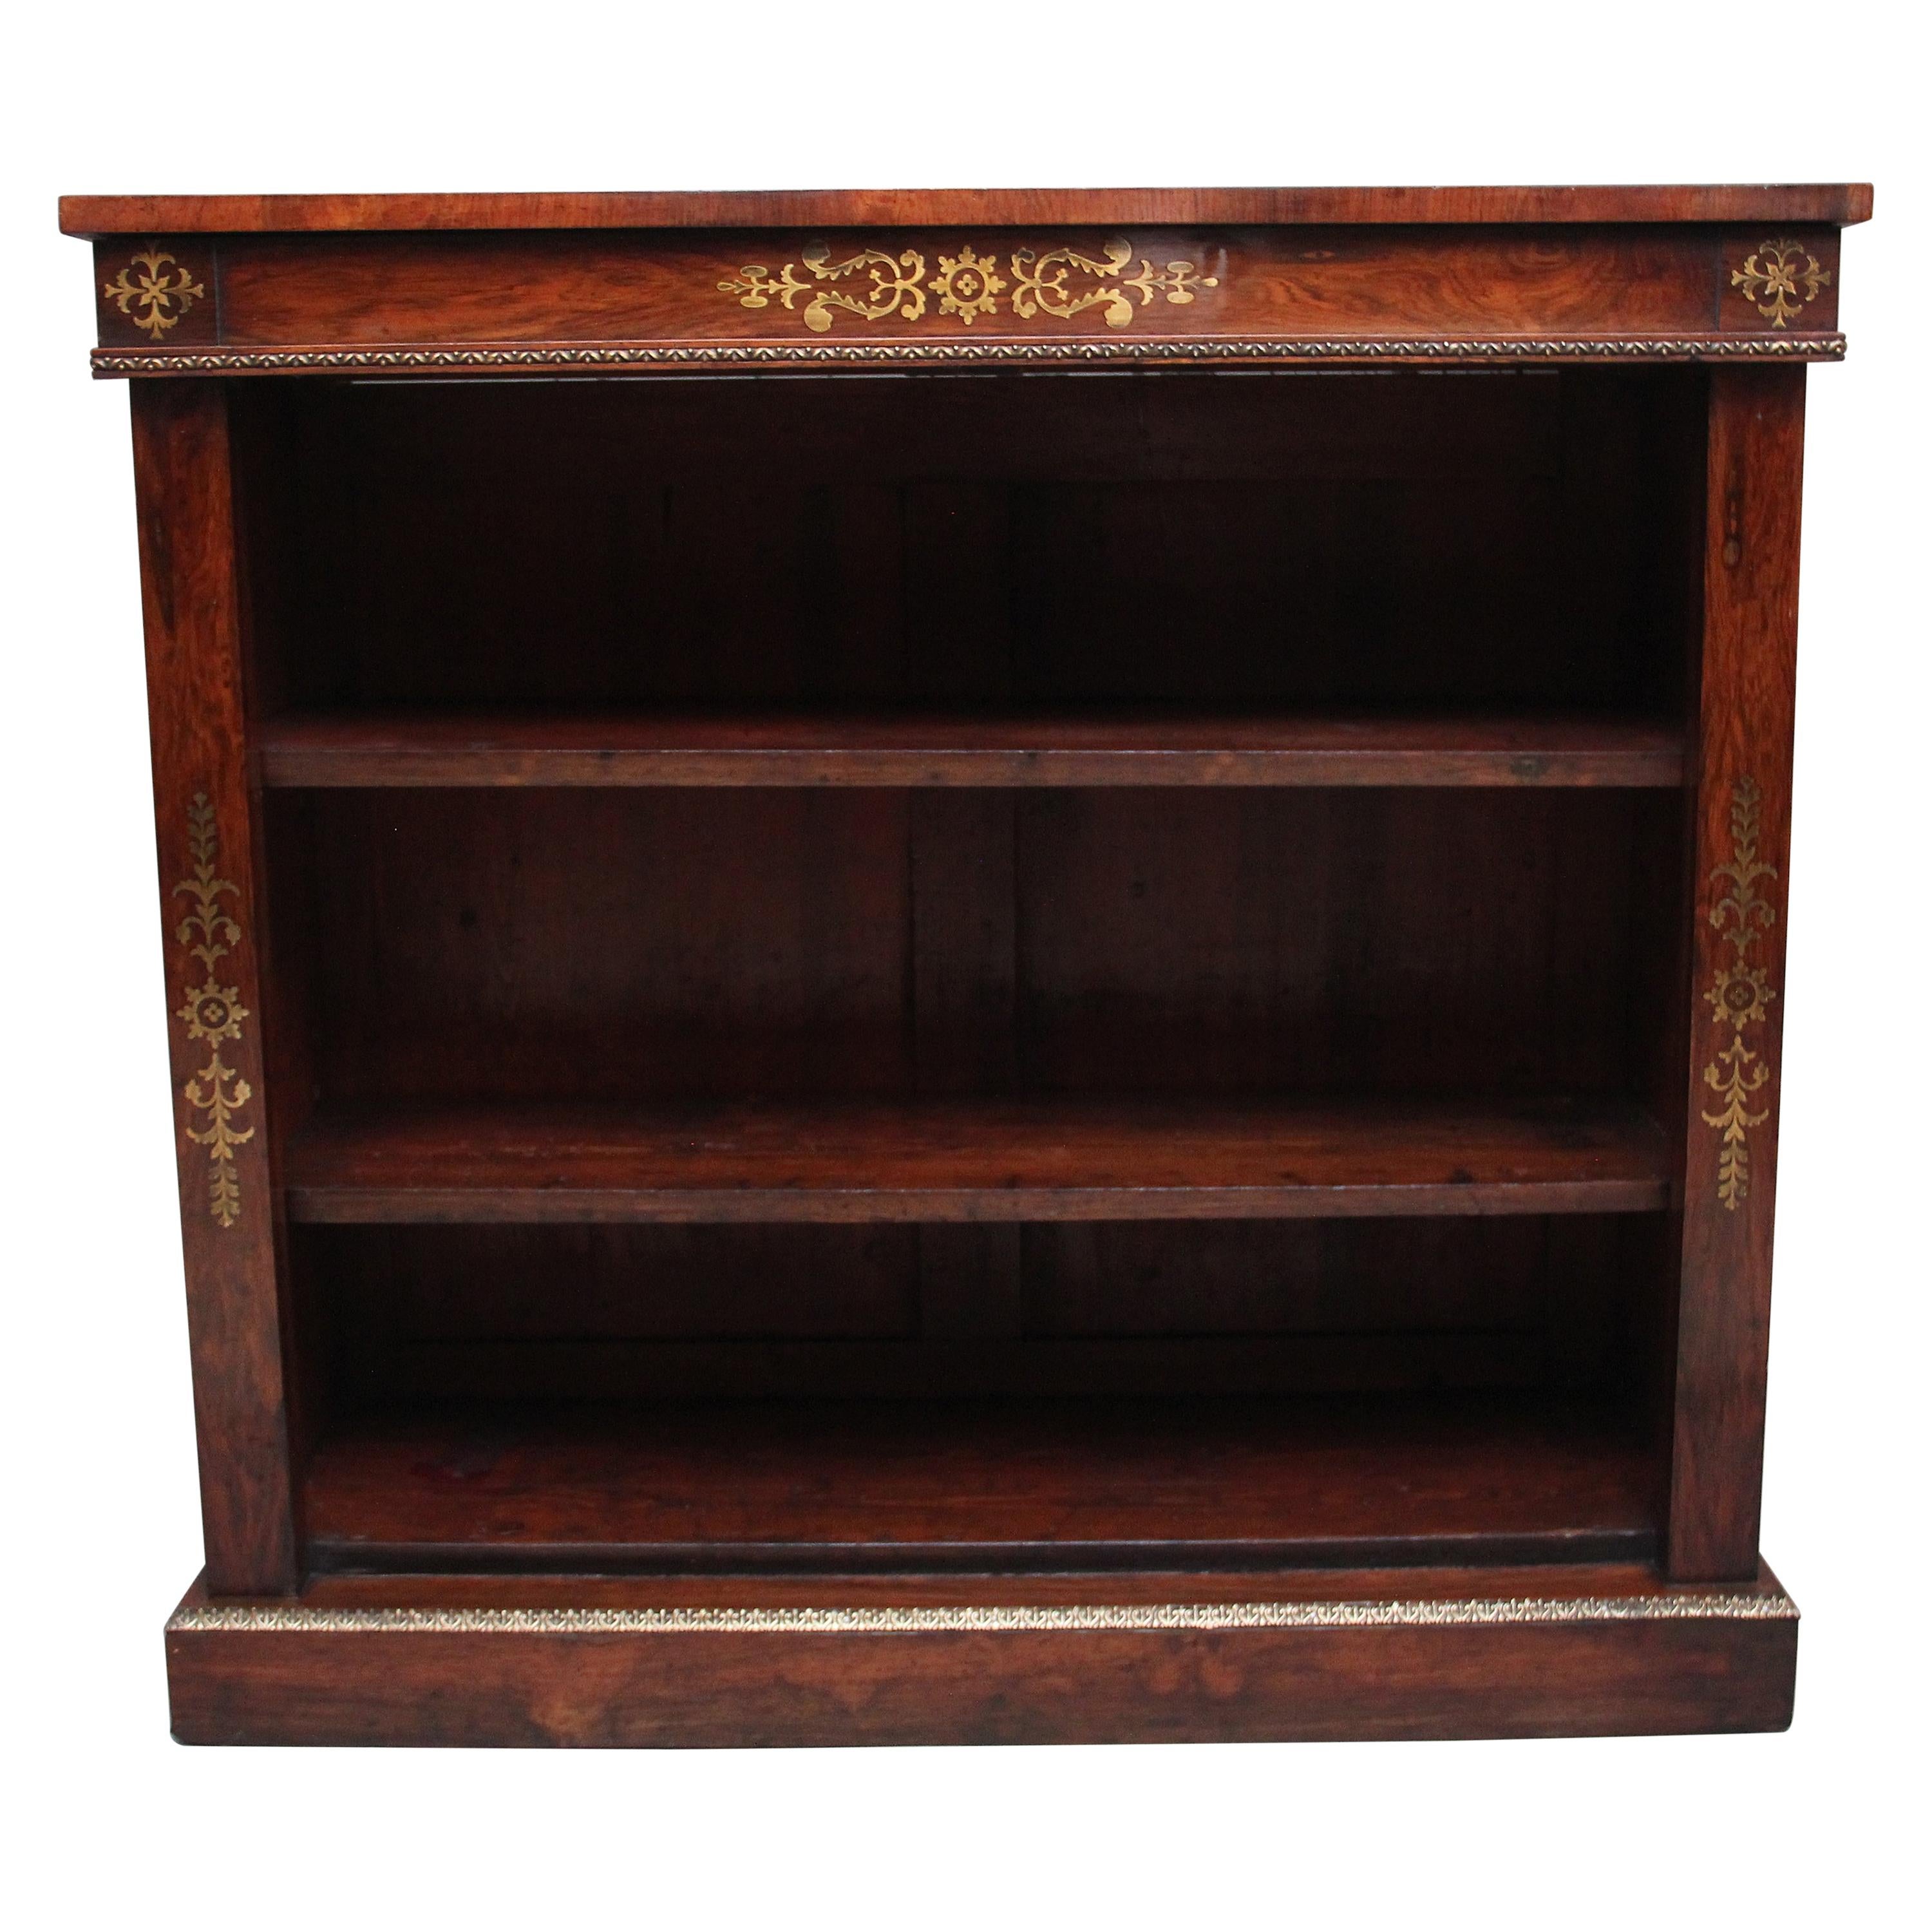 Early 19th Century Rosewood and Brass Inlaid Open Bookcase For Sale